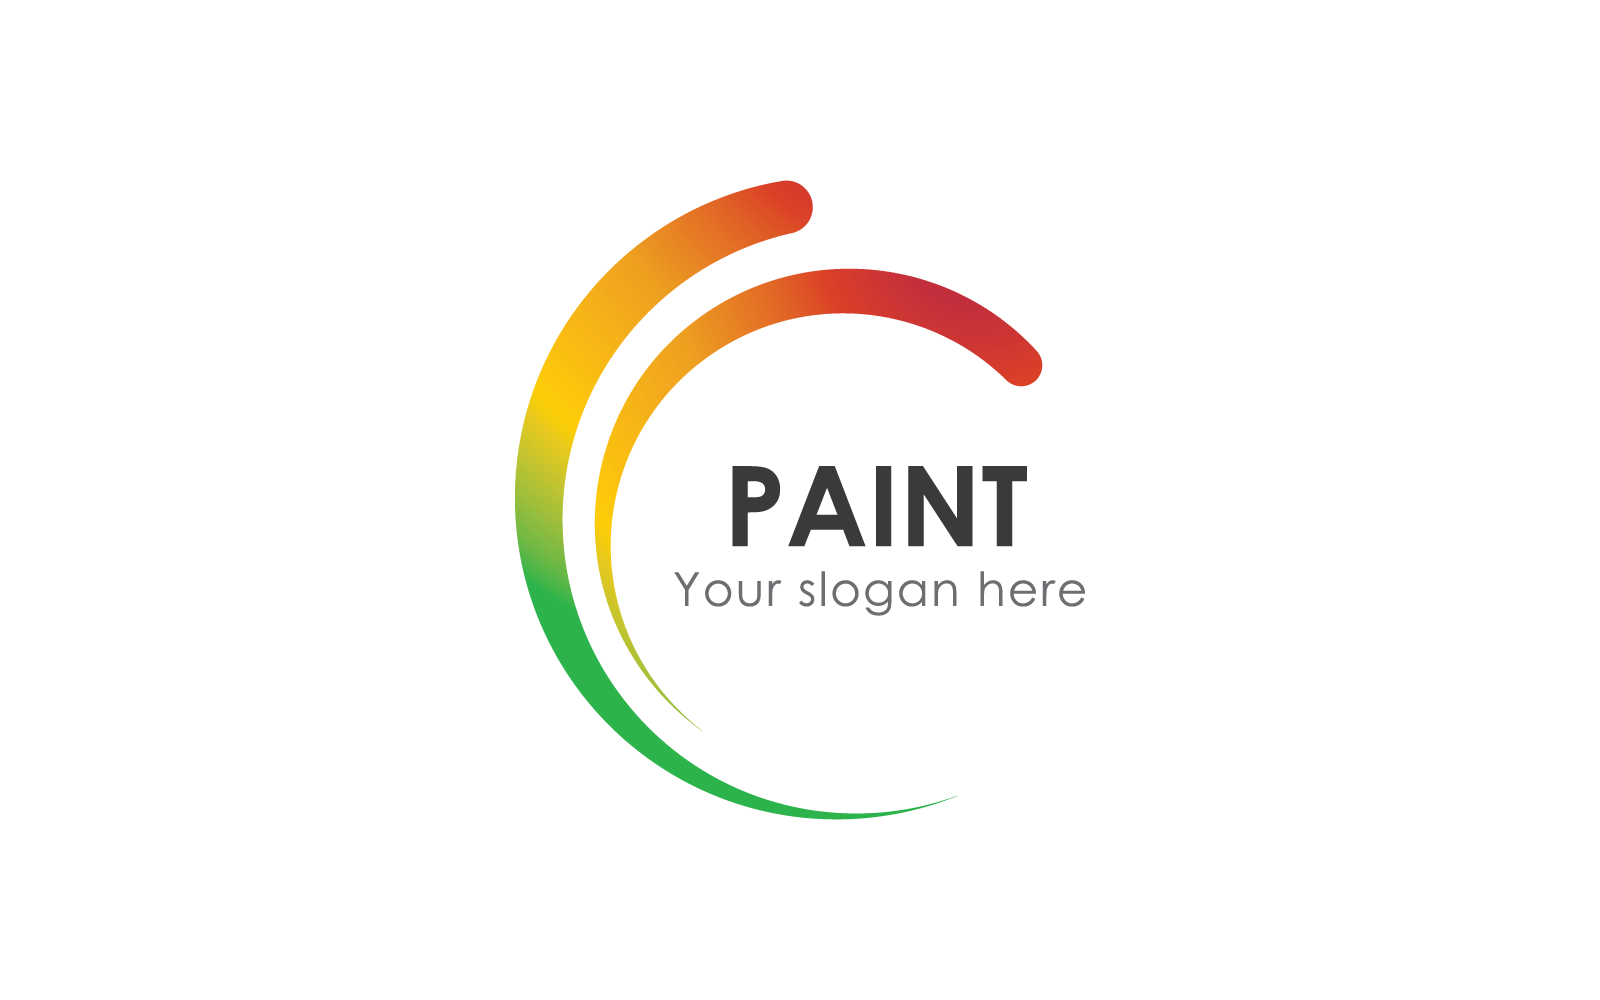 Paint House logo icon business vector flat design template